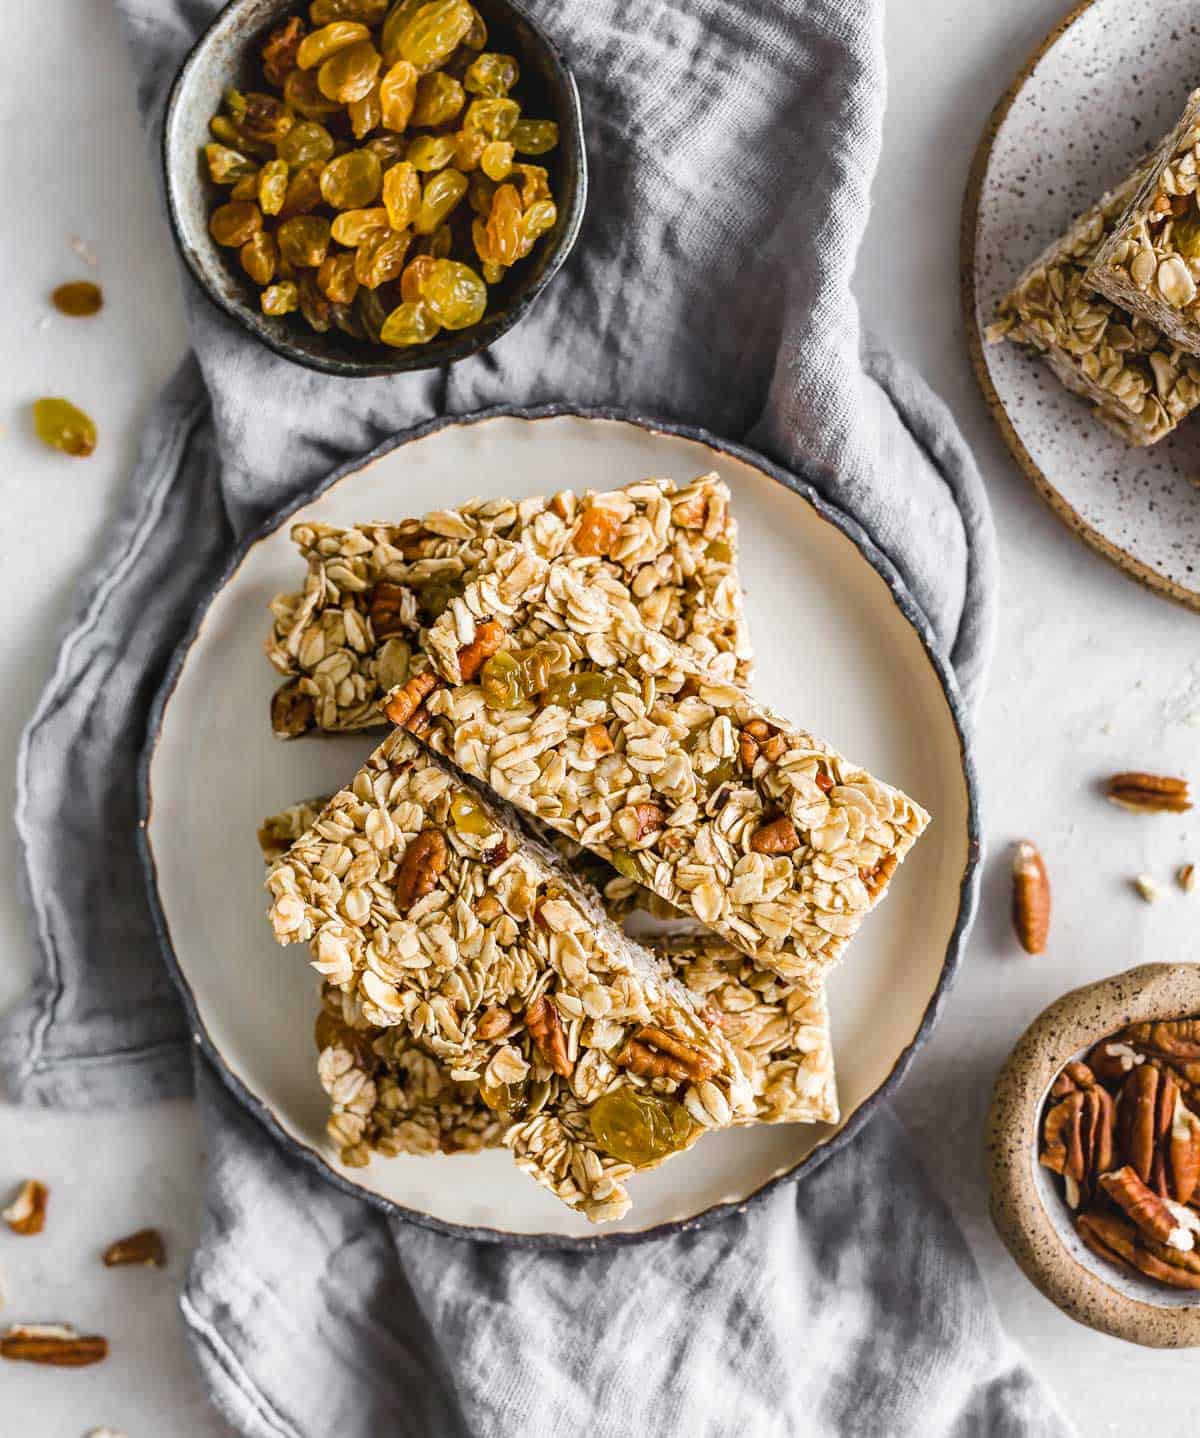 Homemade Oatmeal Raisin Granola Bars with nuts and golden raisins on a black rimmed white plate on a light gray linen napkin.